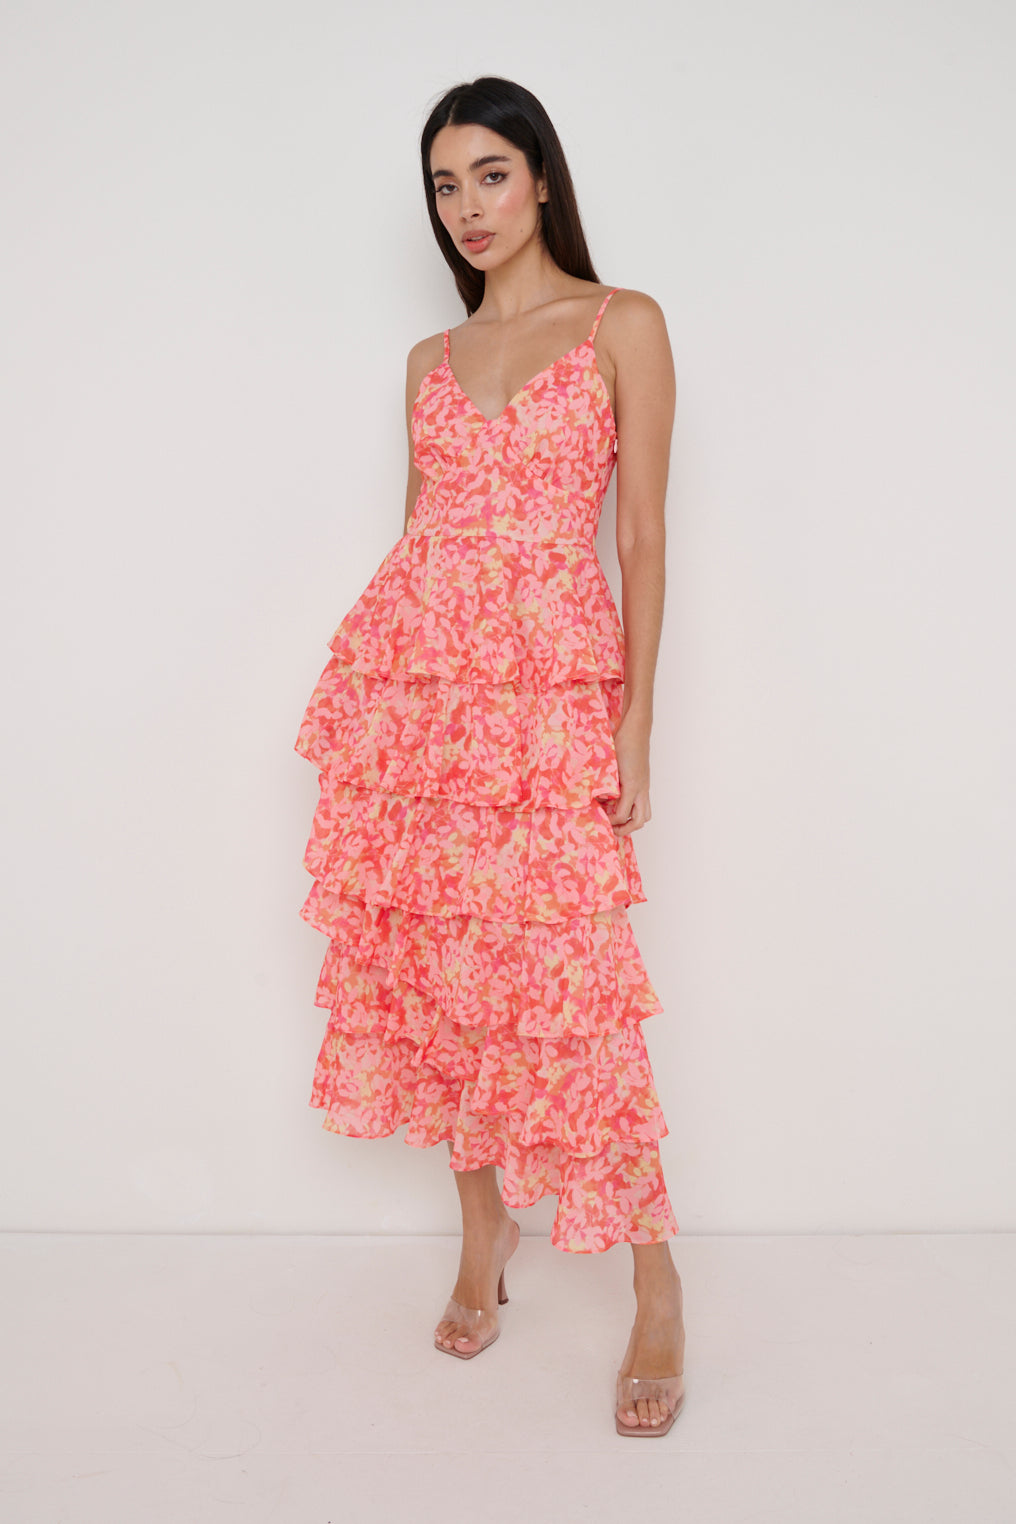 Lissy Ruffle Midaxi Dress - Orange and Pink Floral